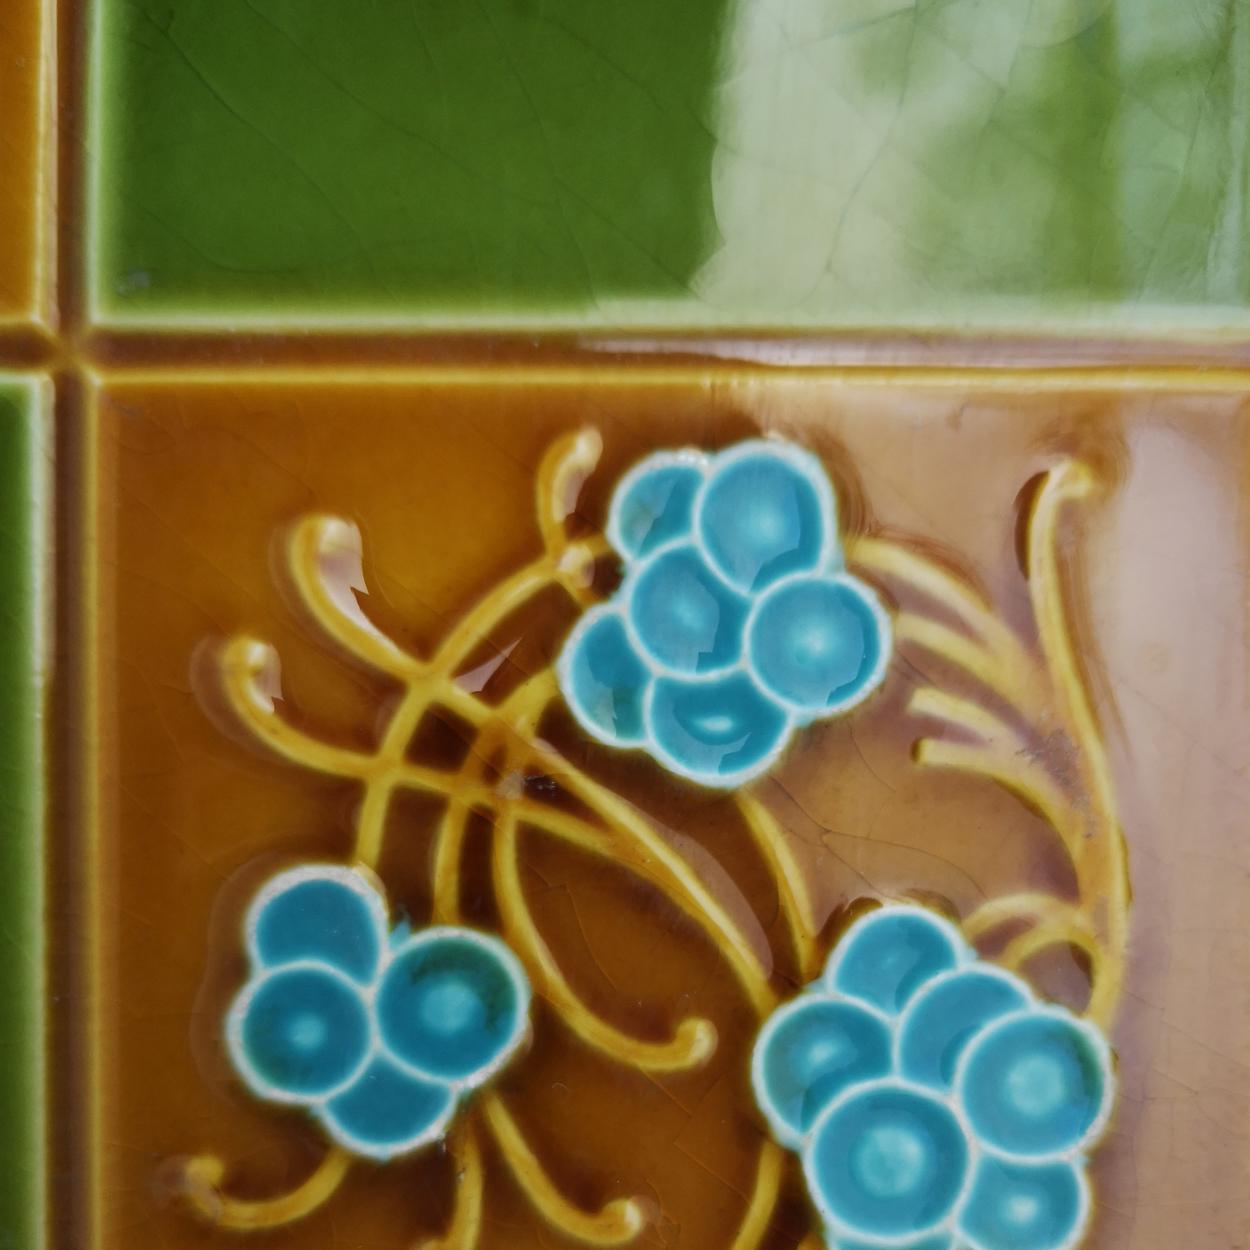 Belgian 1 of the 40 Art Deco Glased Relief Tiles by Gilliot Frères, Hemiksem, circa 1920 For Sale